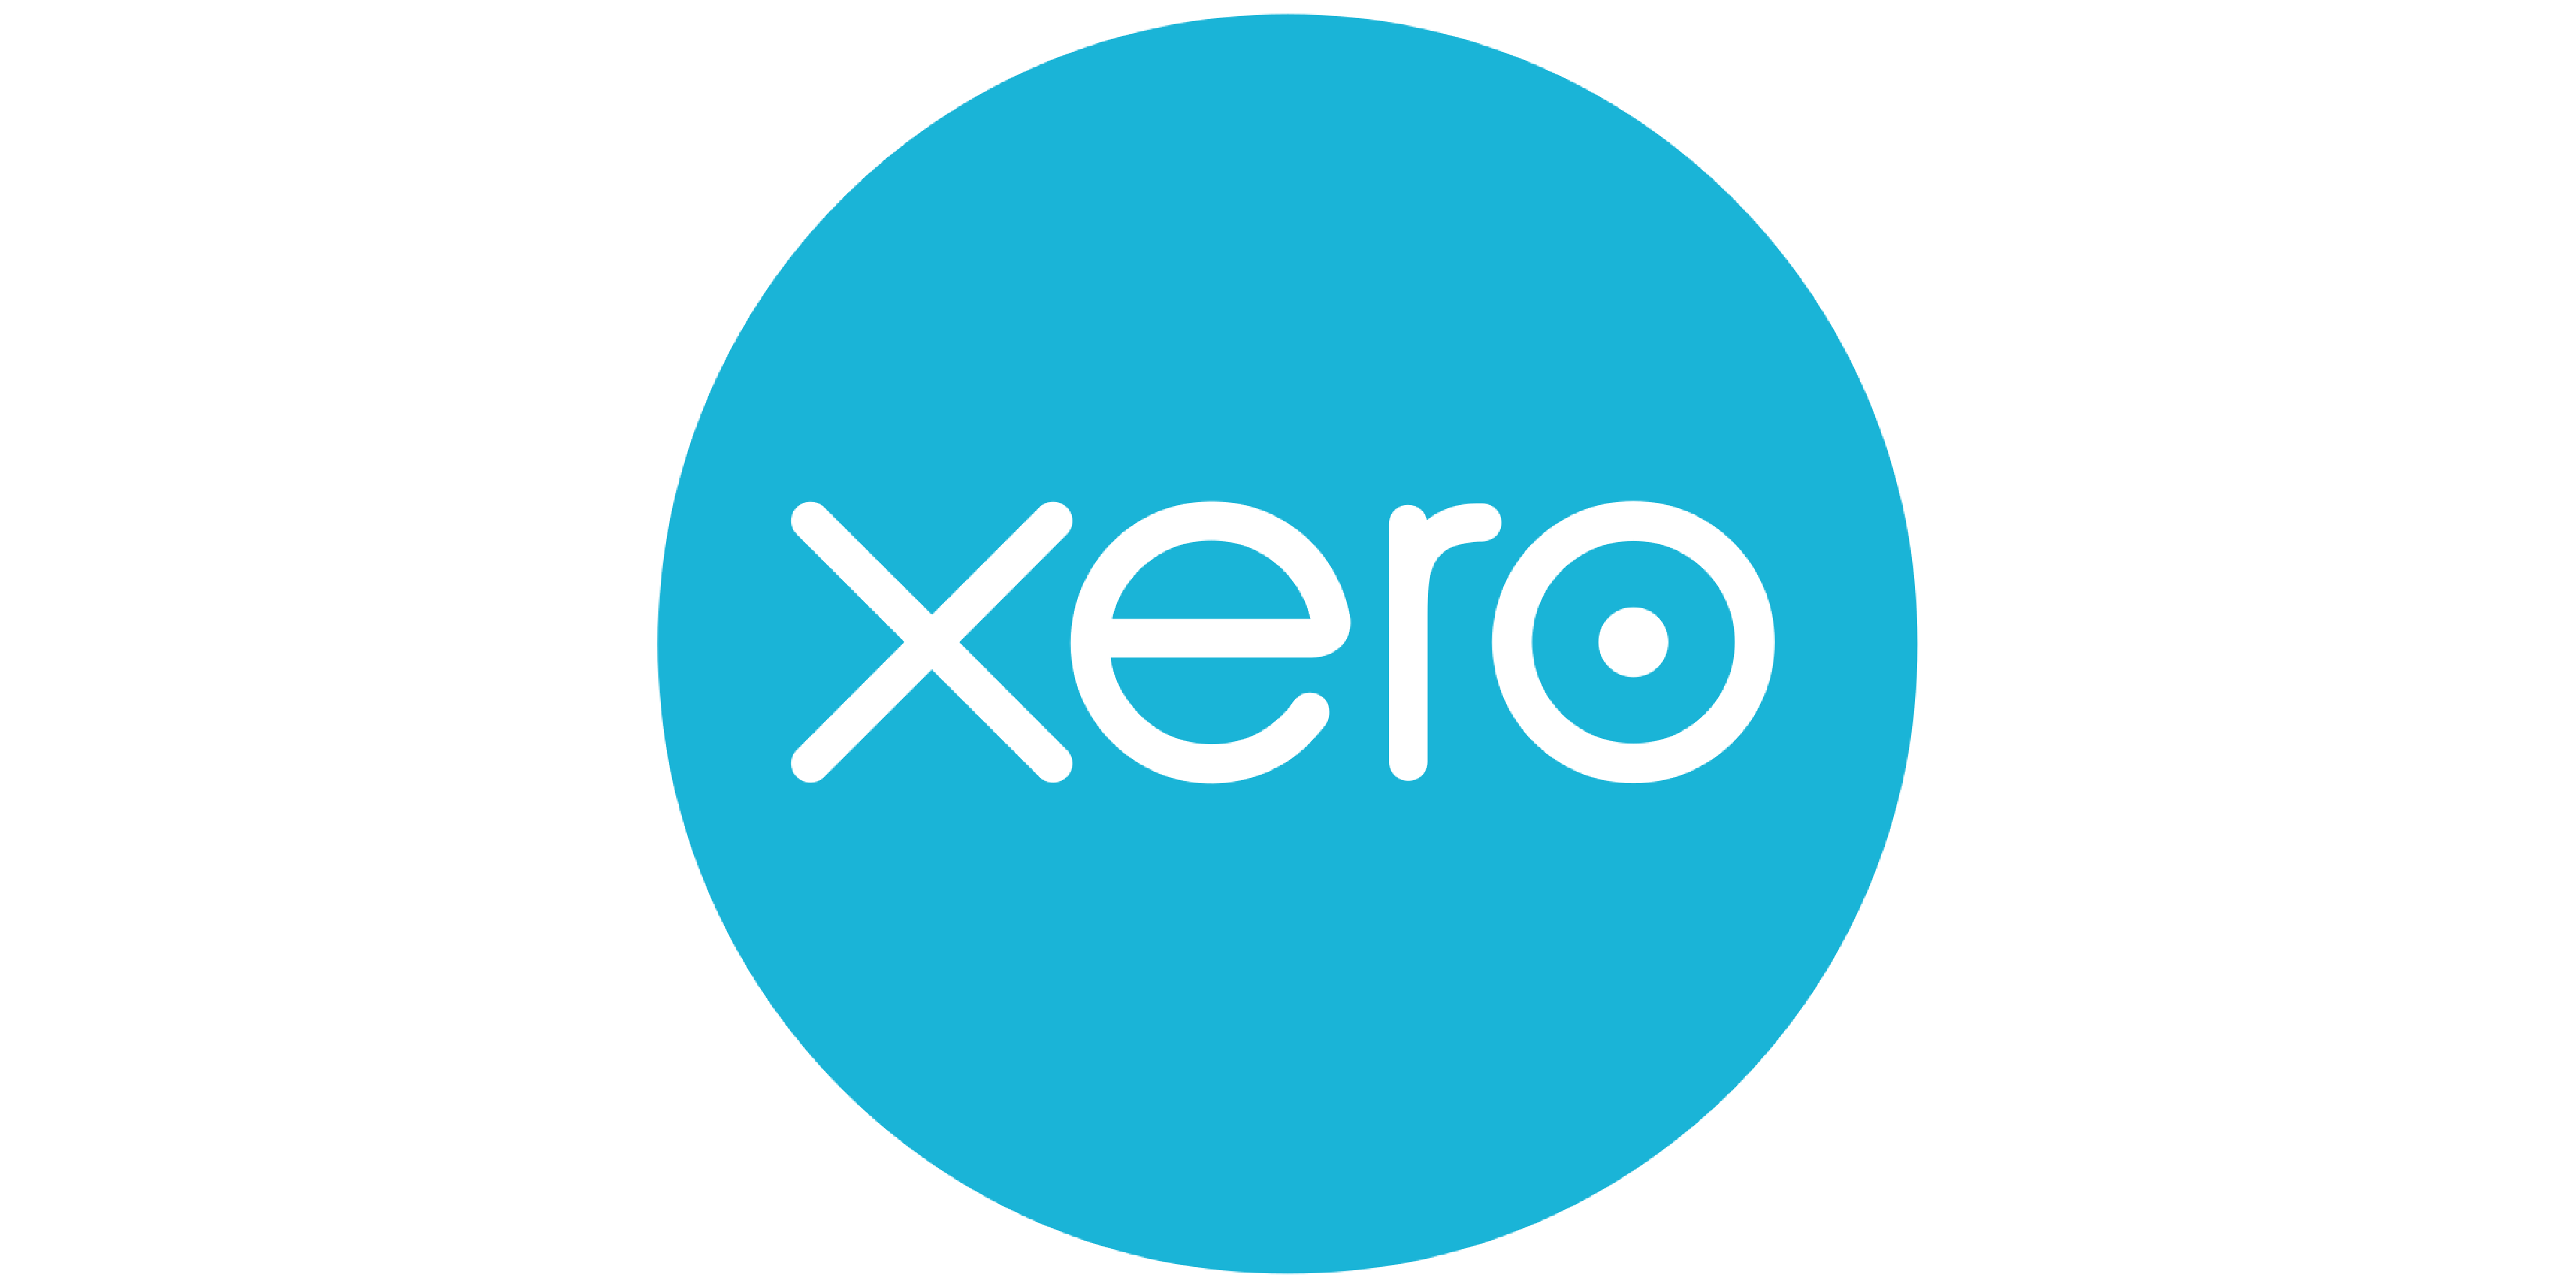 Switching from Xero to BrightPay